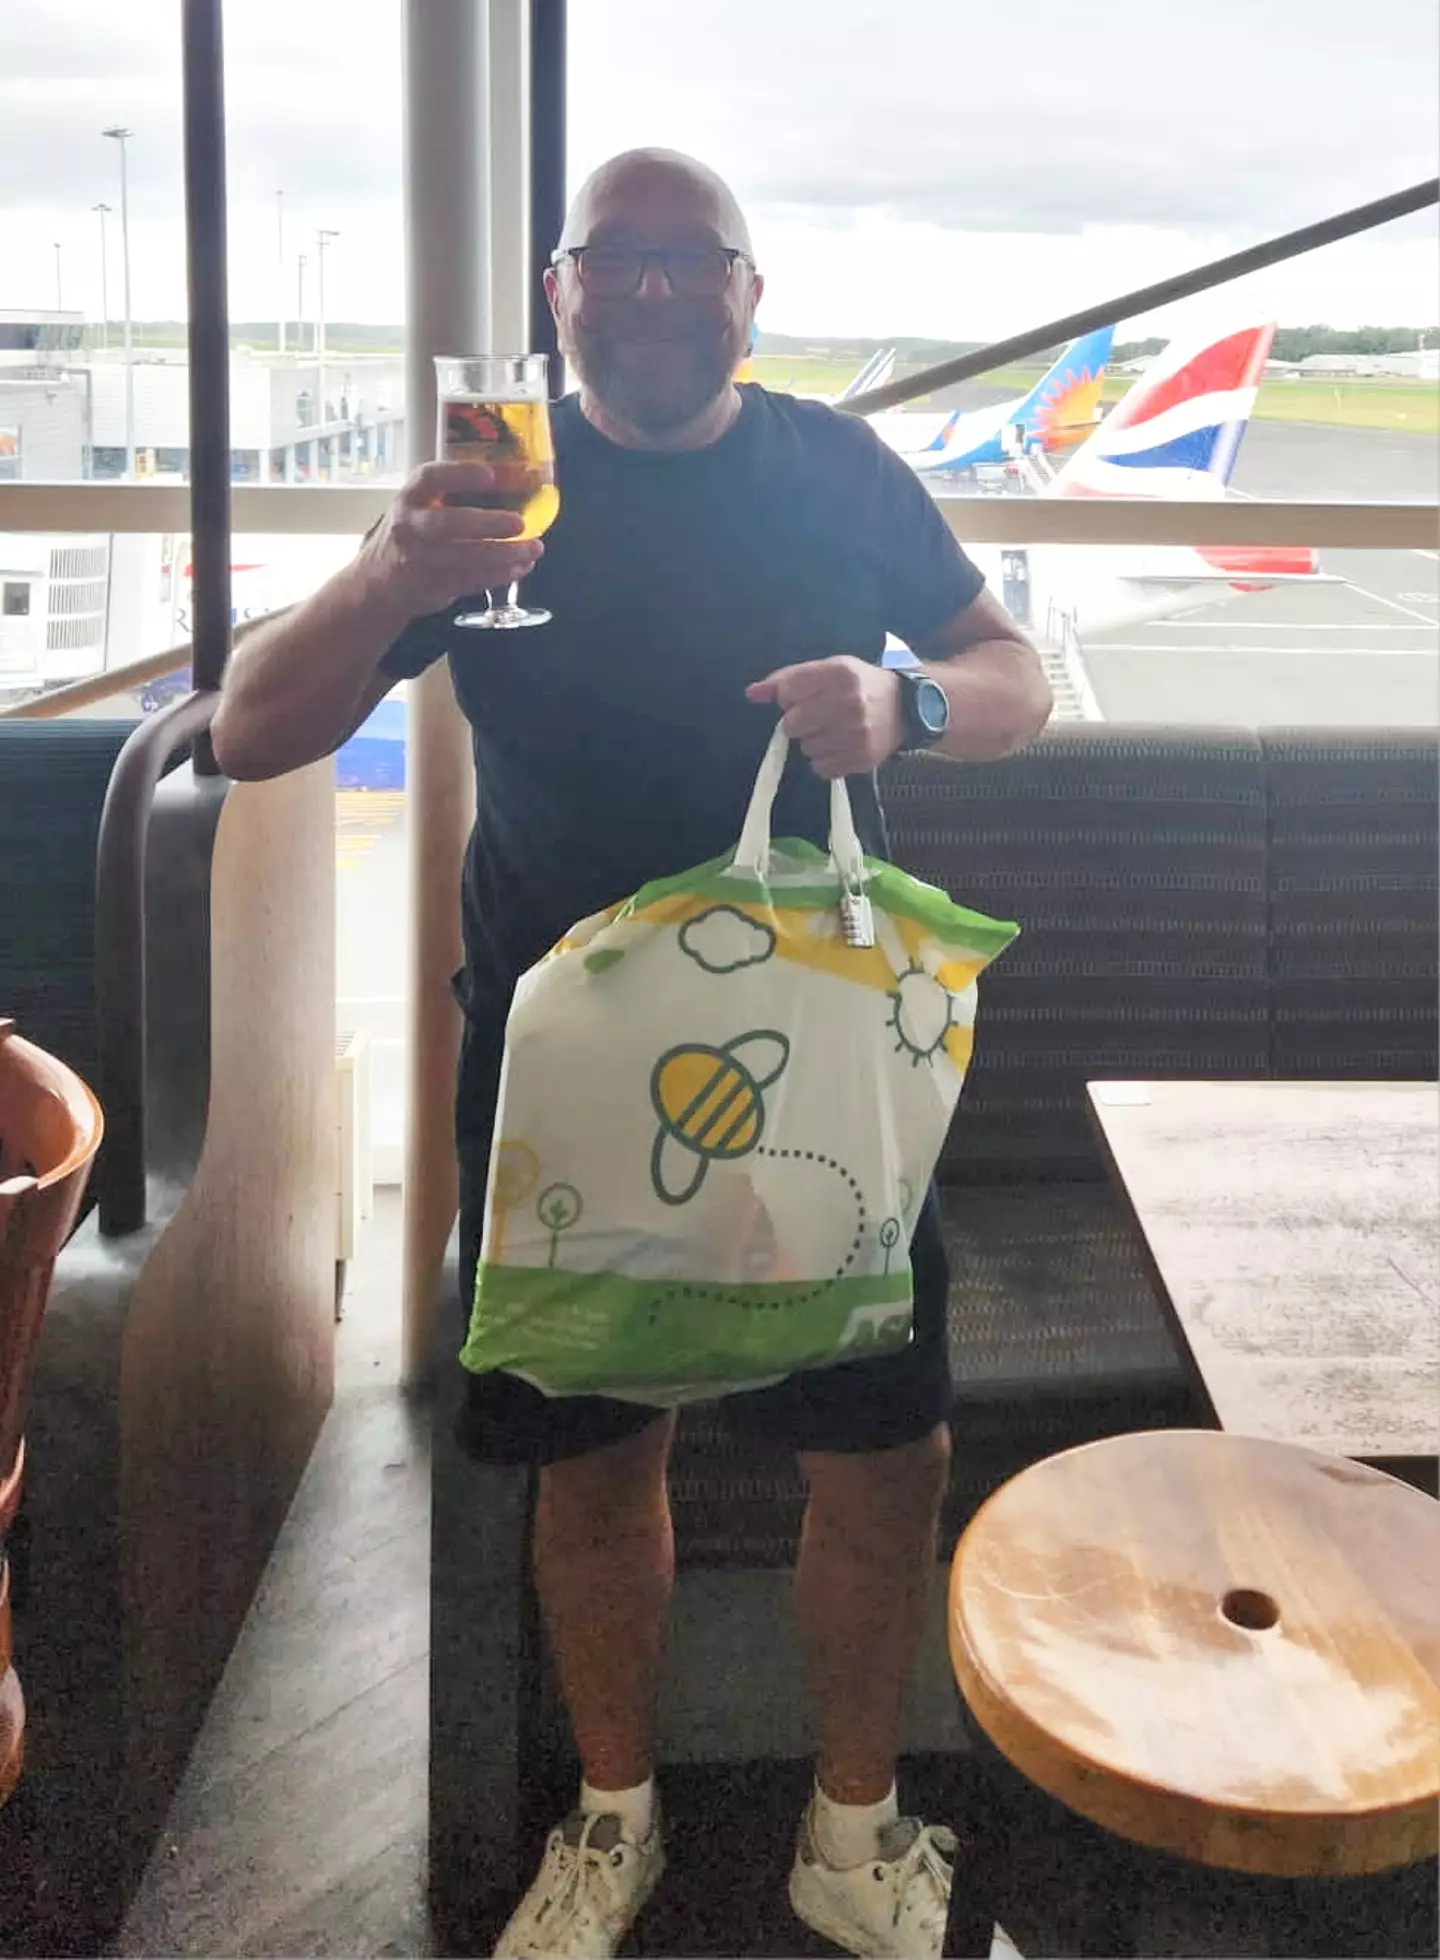 The party-loving dad flew out with just an Asda carrier bag.